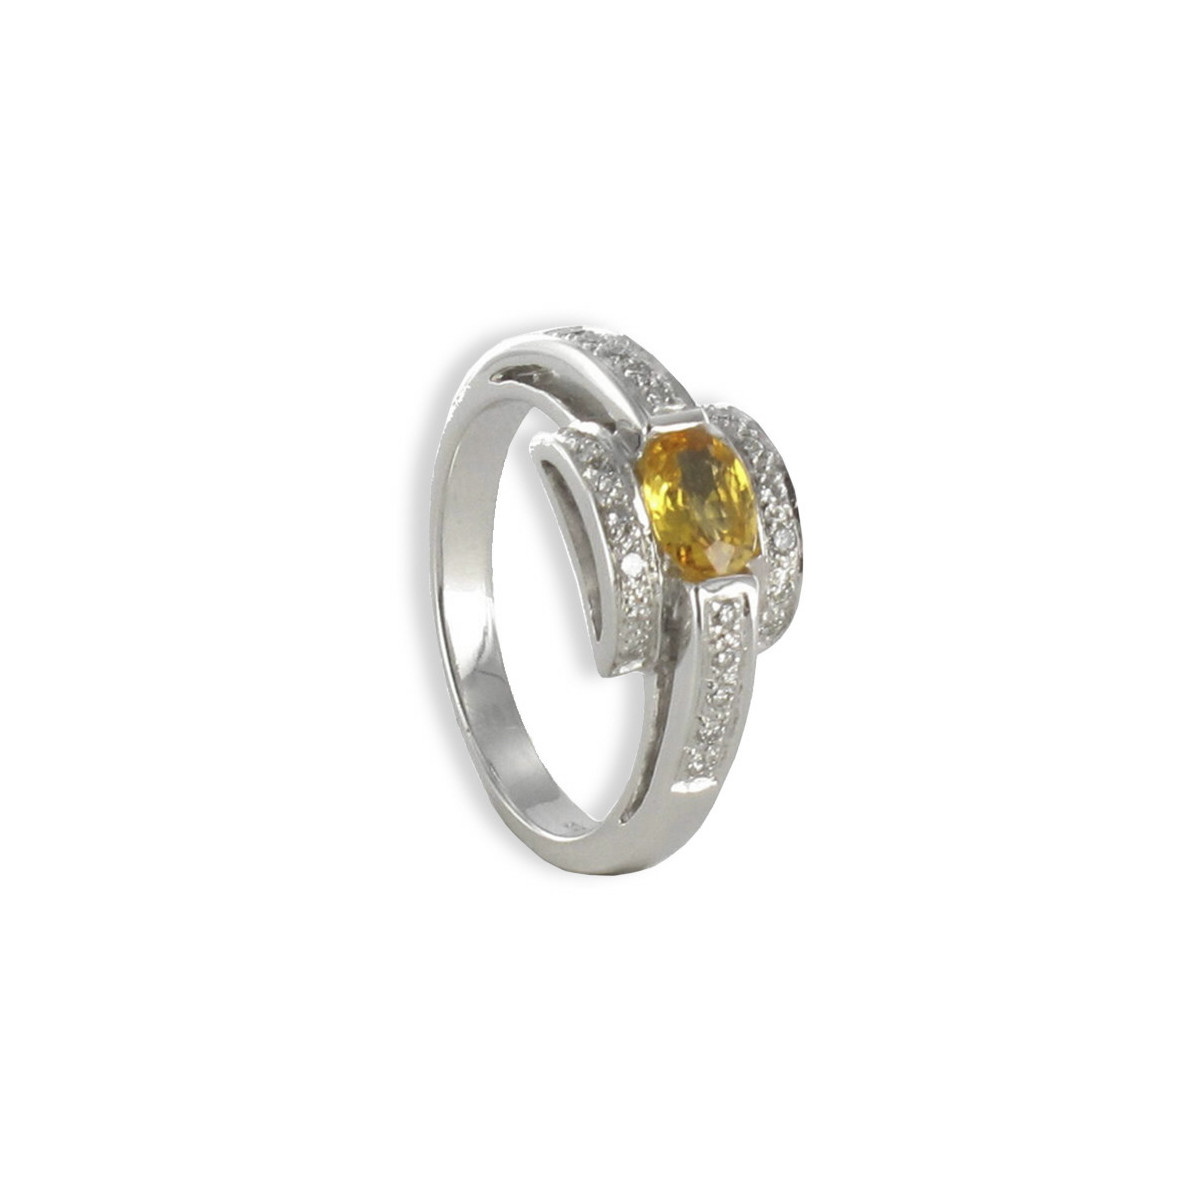 RING WITH YELLOW SAPPHIRE AND DIAMONDS